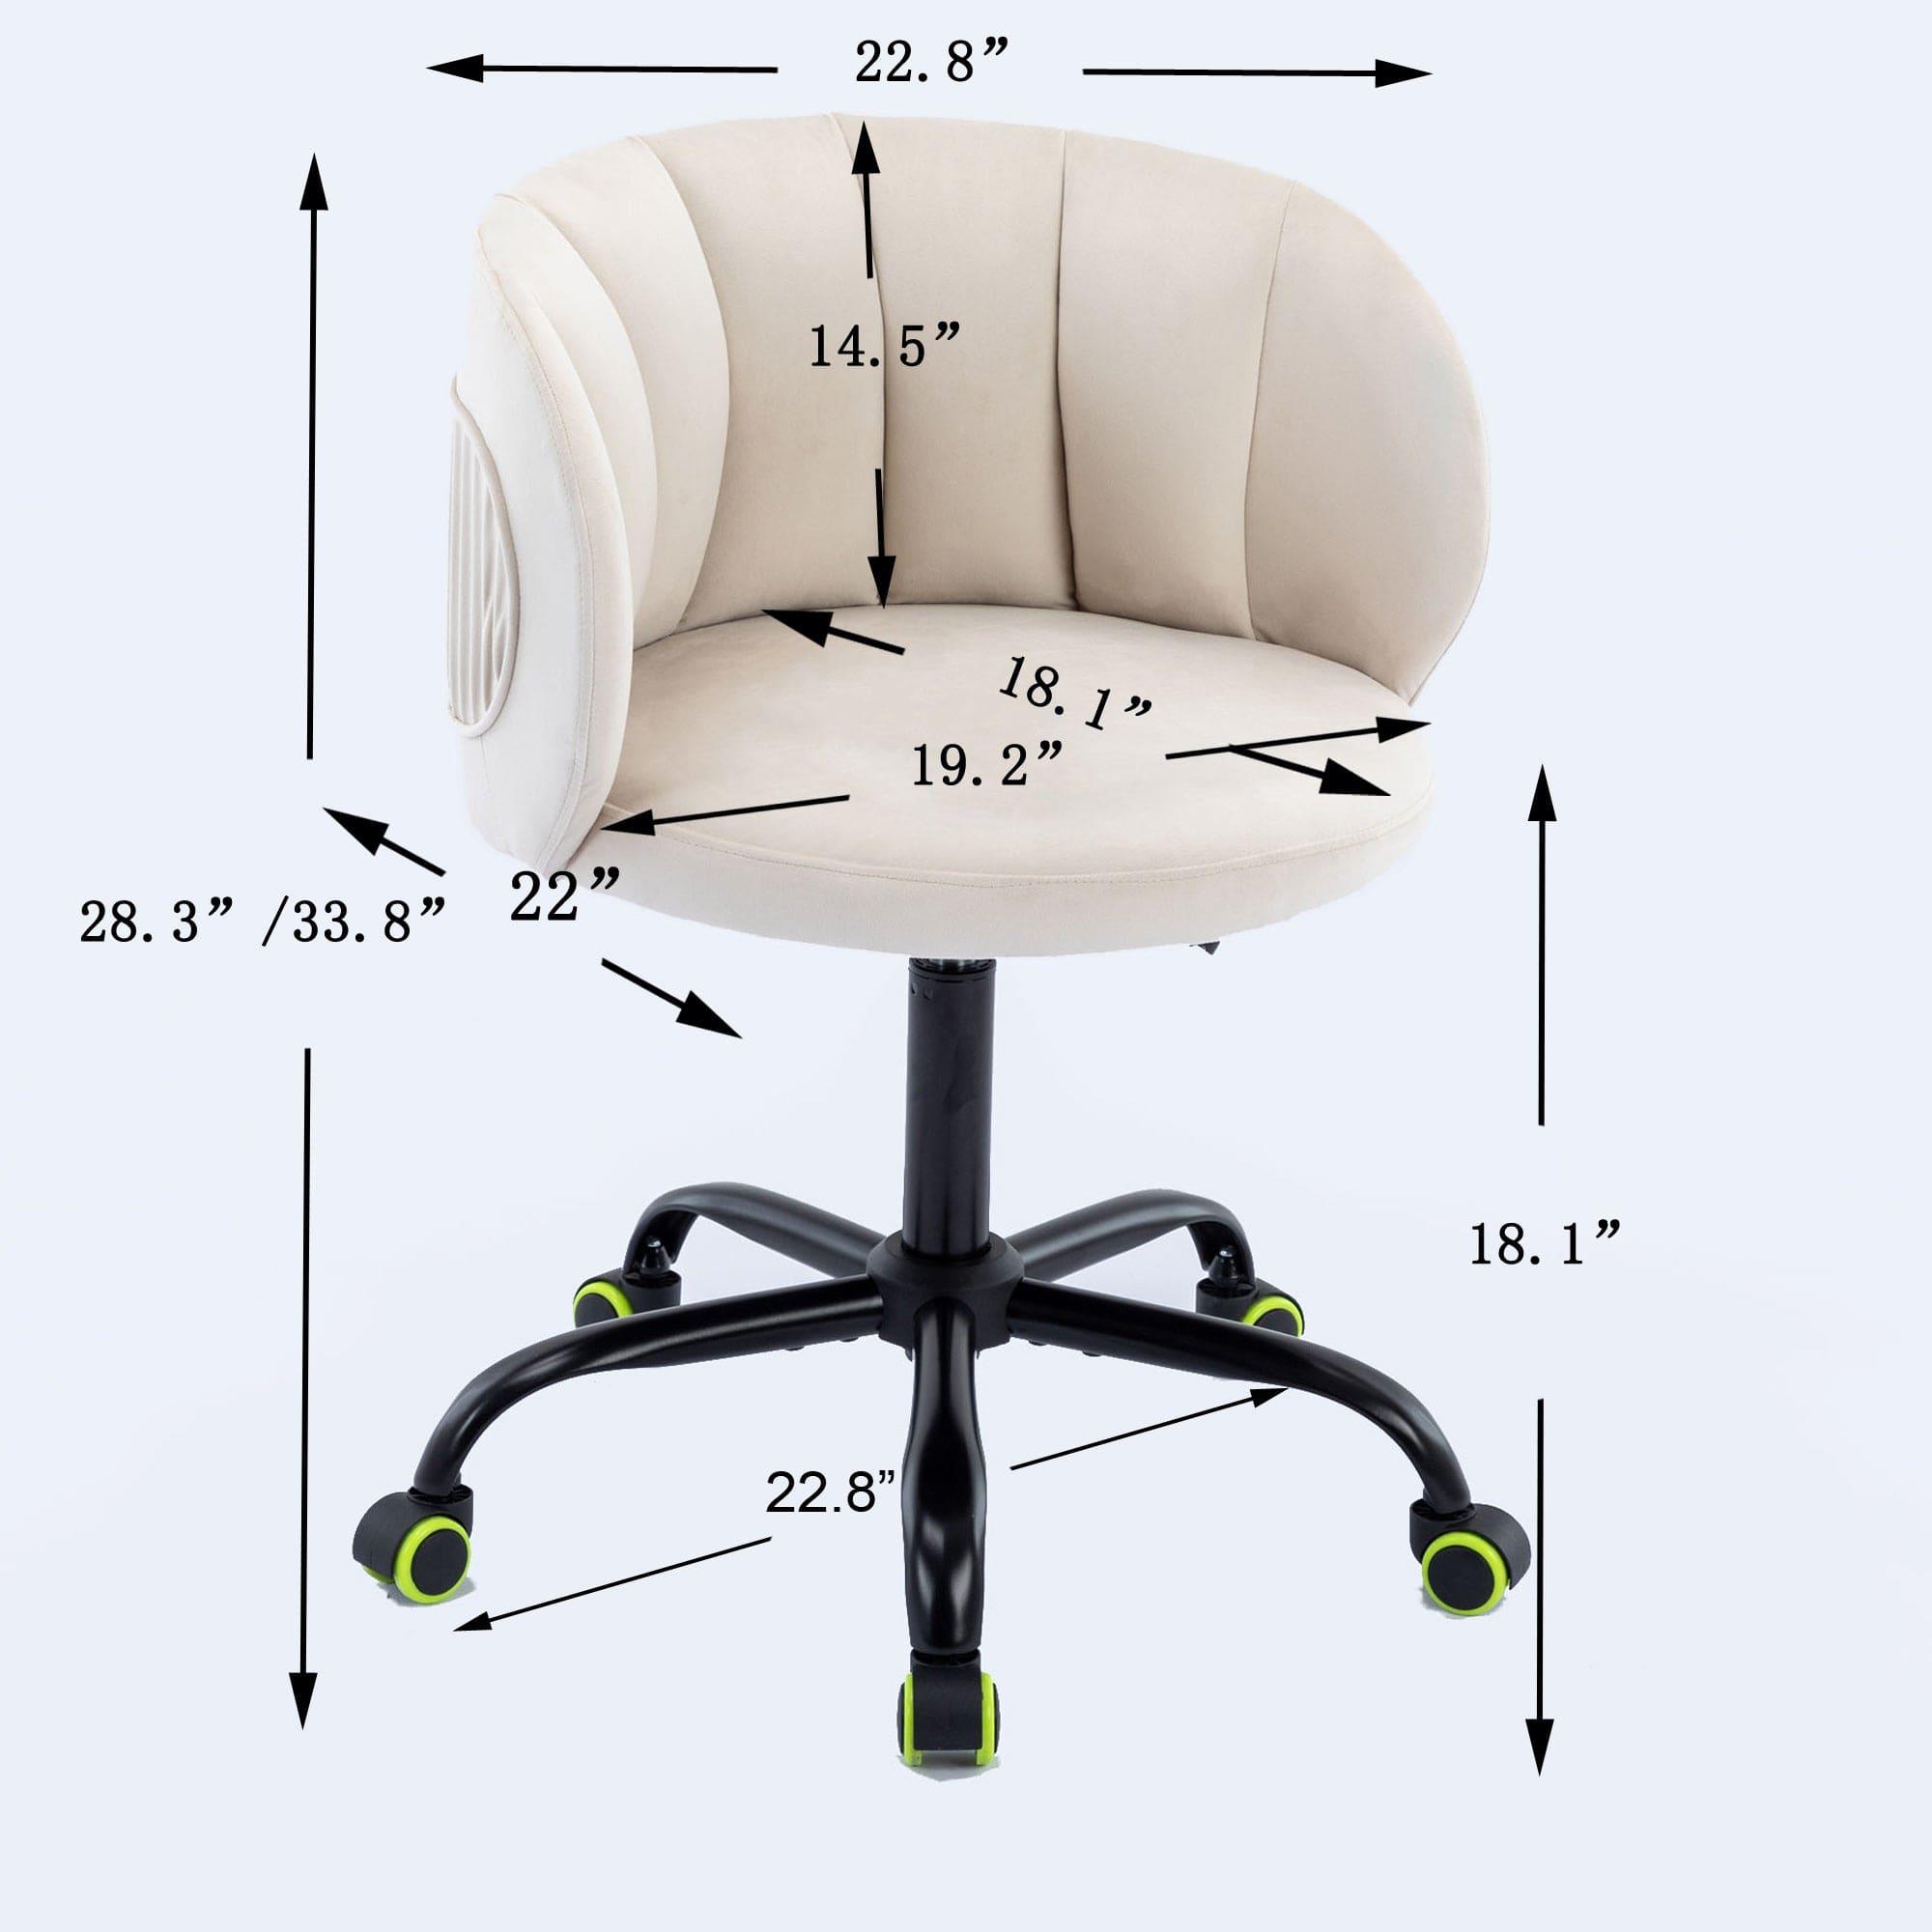 Shop Zen Zone Velvet Leisure office chair, suitable for study and office, can adjust the height, can rotate 360 degrees, with pulley, Off-White Mademoiselle Home Decor